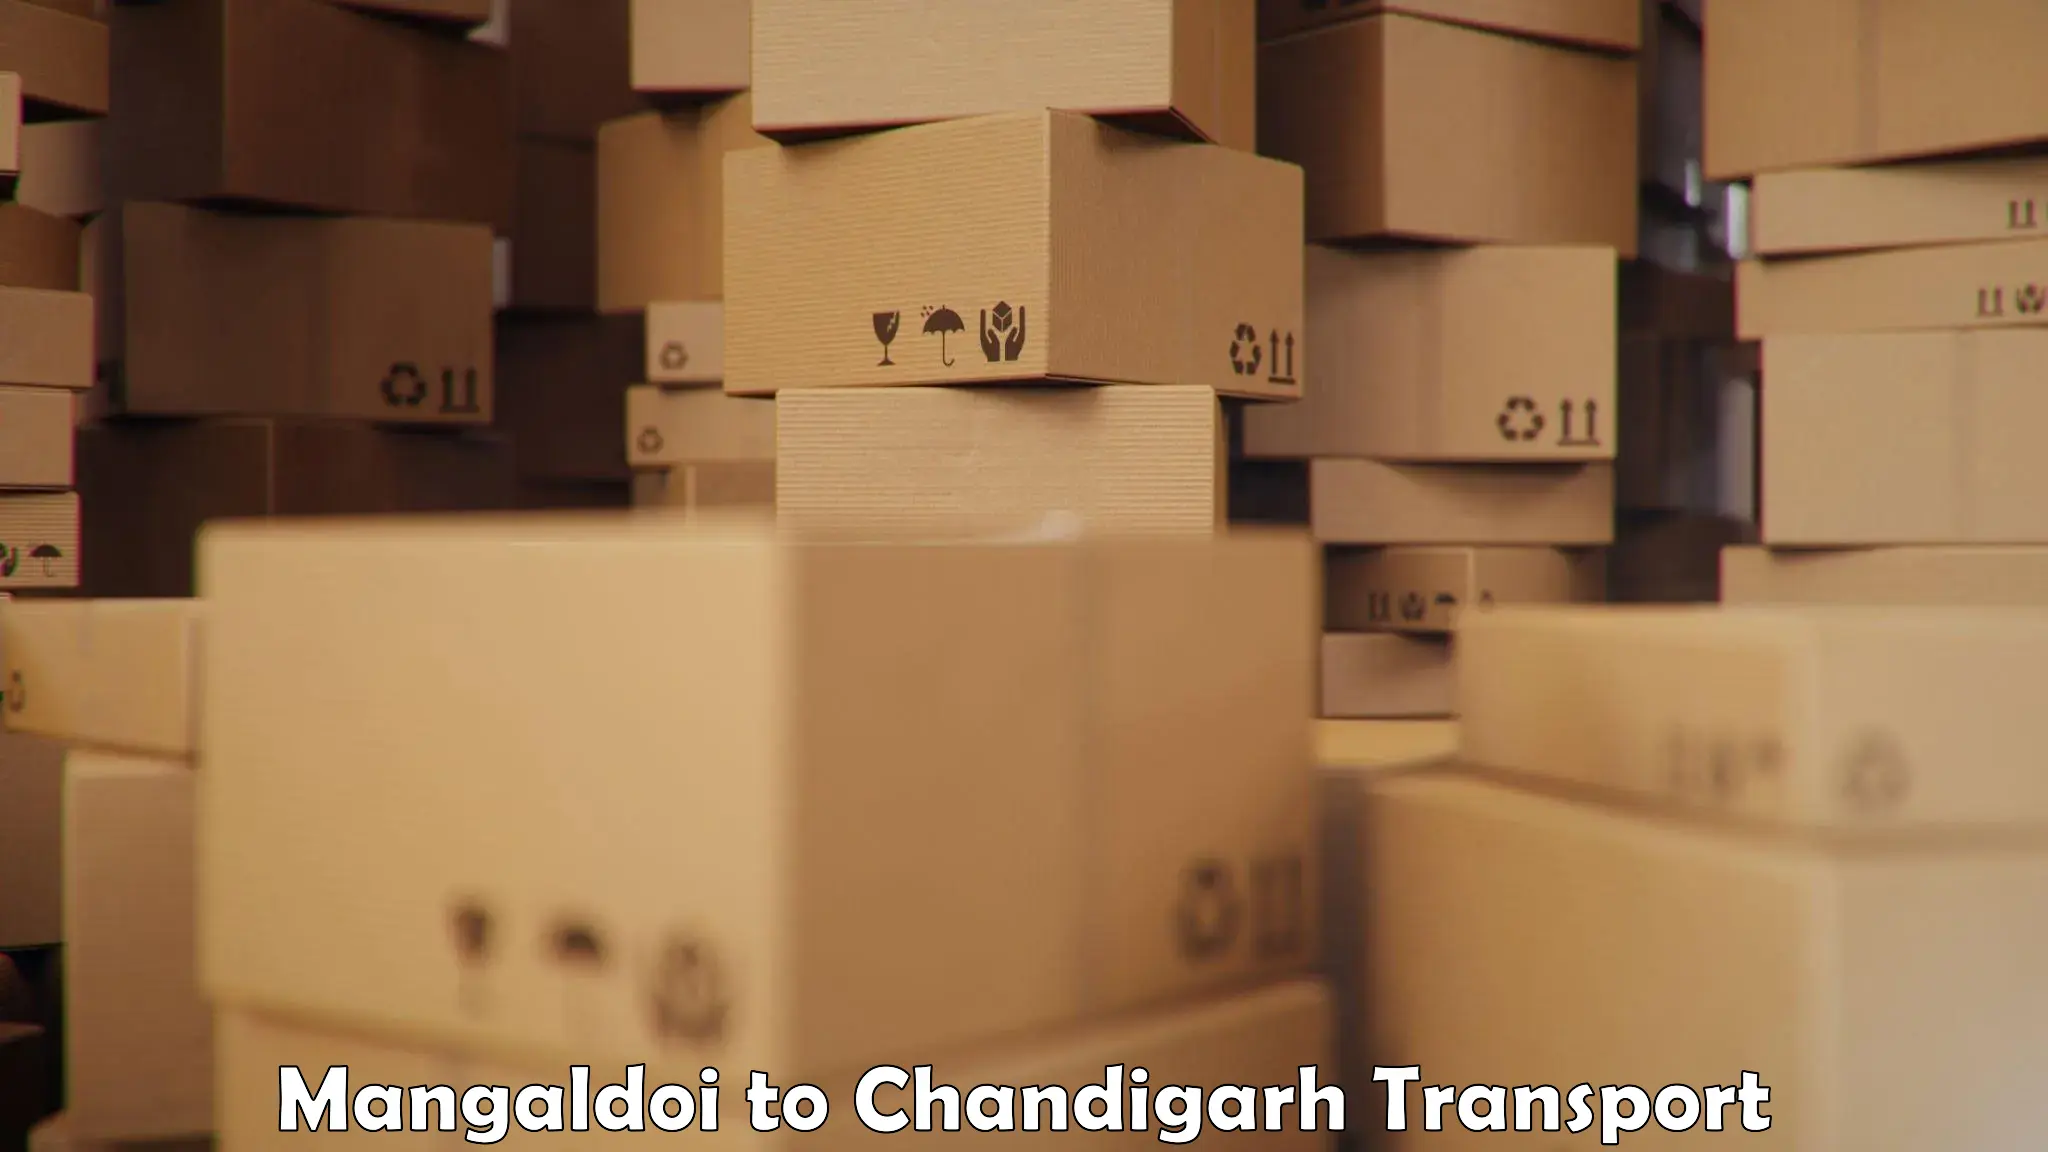 Goods delivery service Mangaldoi to Chandigarh